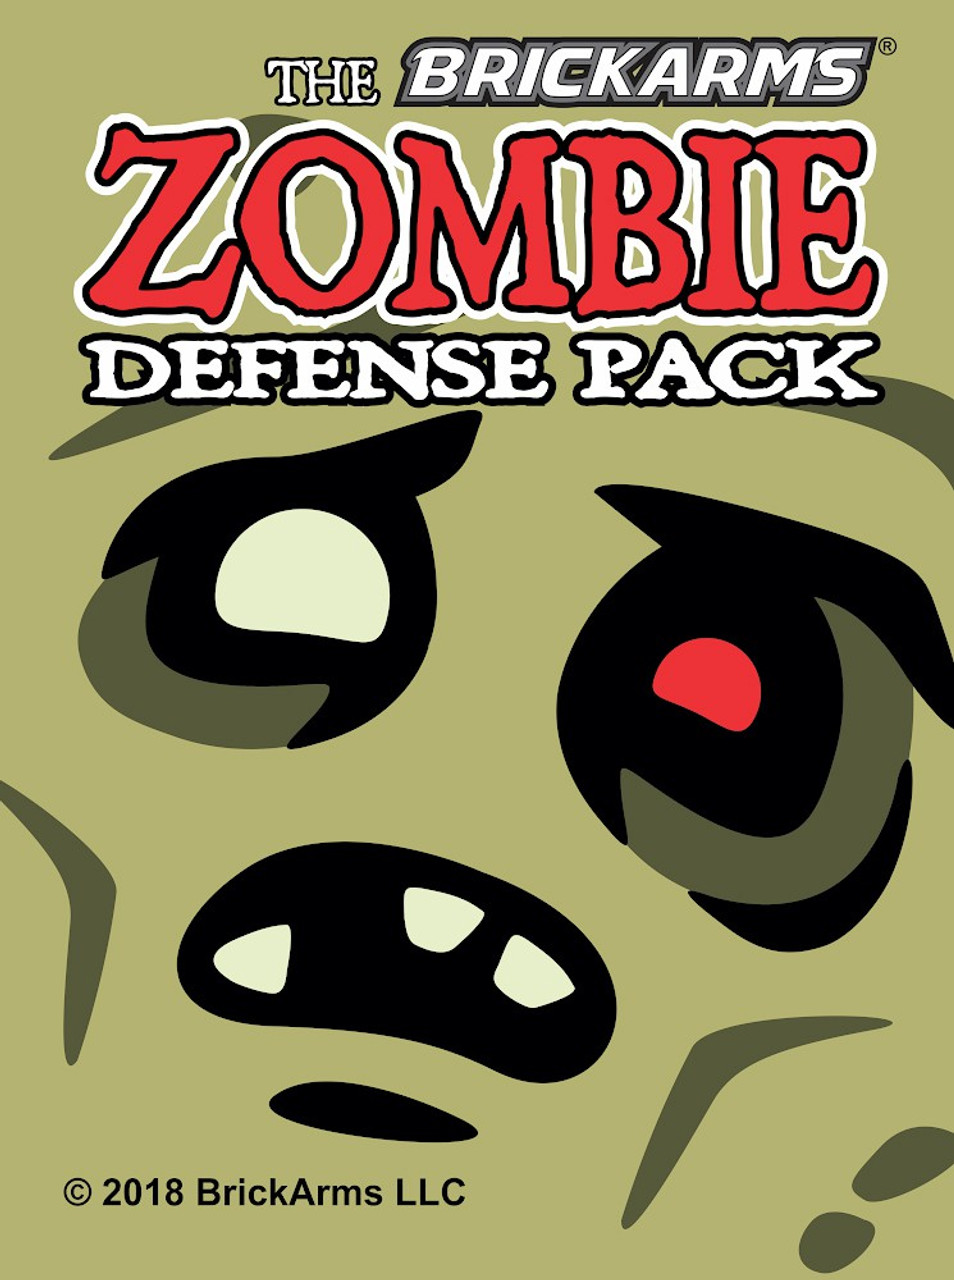 Brickarms Zombie Defense Pack 2018 2 5 Weapons Pack Toywiz - super zombie bros map 2 custom black ops 1 roblox